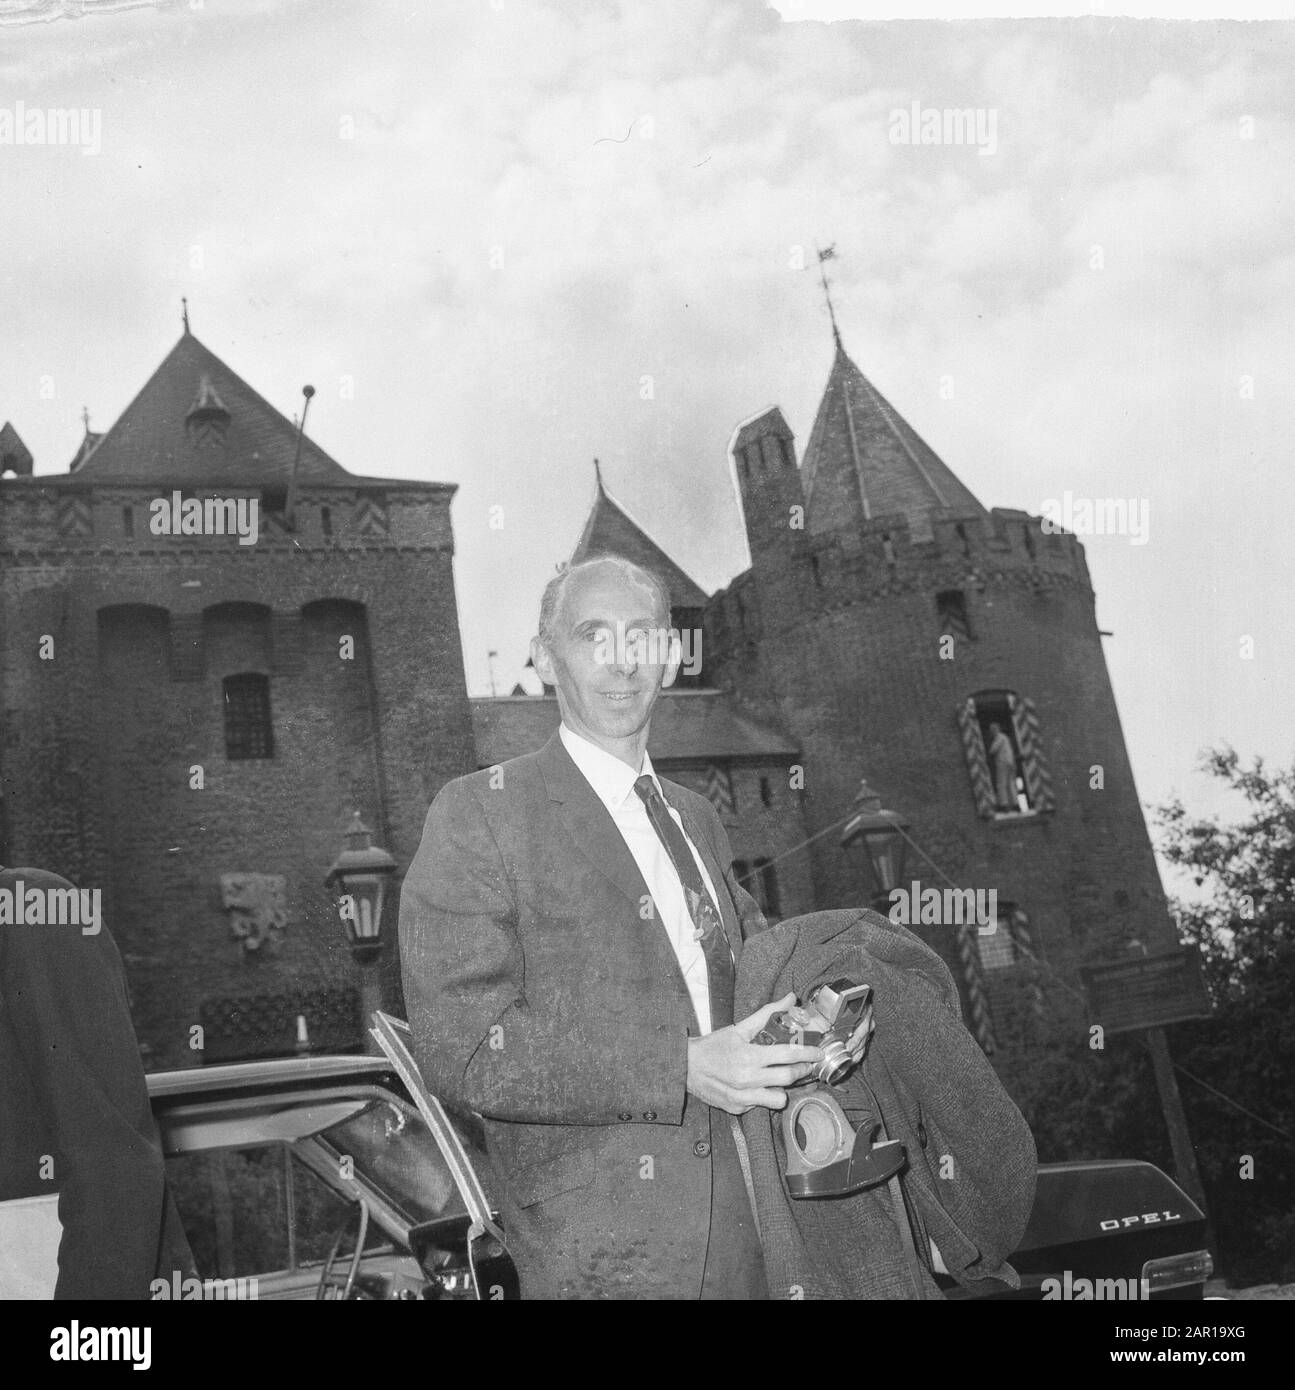 Leo Vroman received state award for literature in the Muiderslot Date: May 24, 1965 Keywords: prize winners Person name: Literature, Vroman, Leo Institution name: Muiderslot Stock Photo